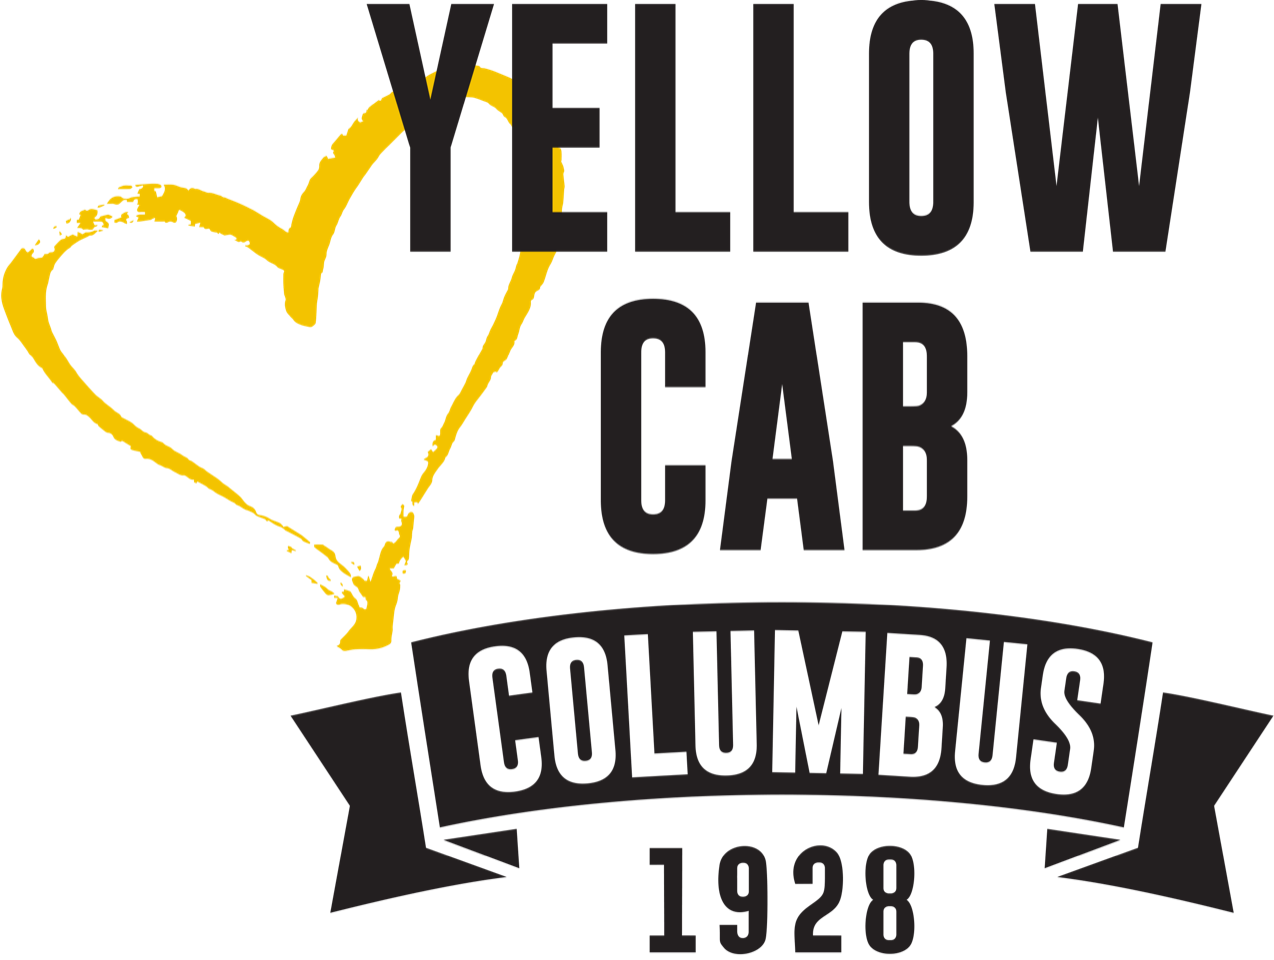 https://www.bexleyyouthfootball.com/wp-content/uploads/sites/2361/2021/08/yellow-cab.png